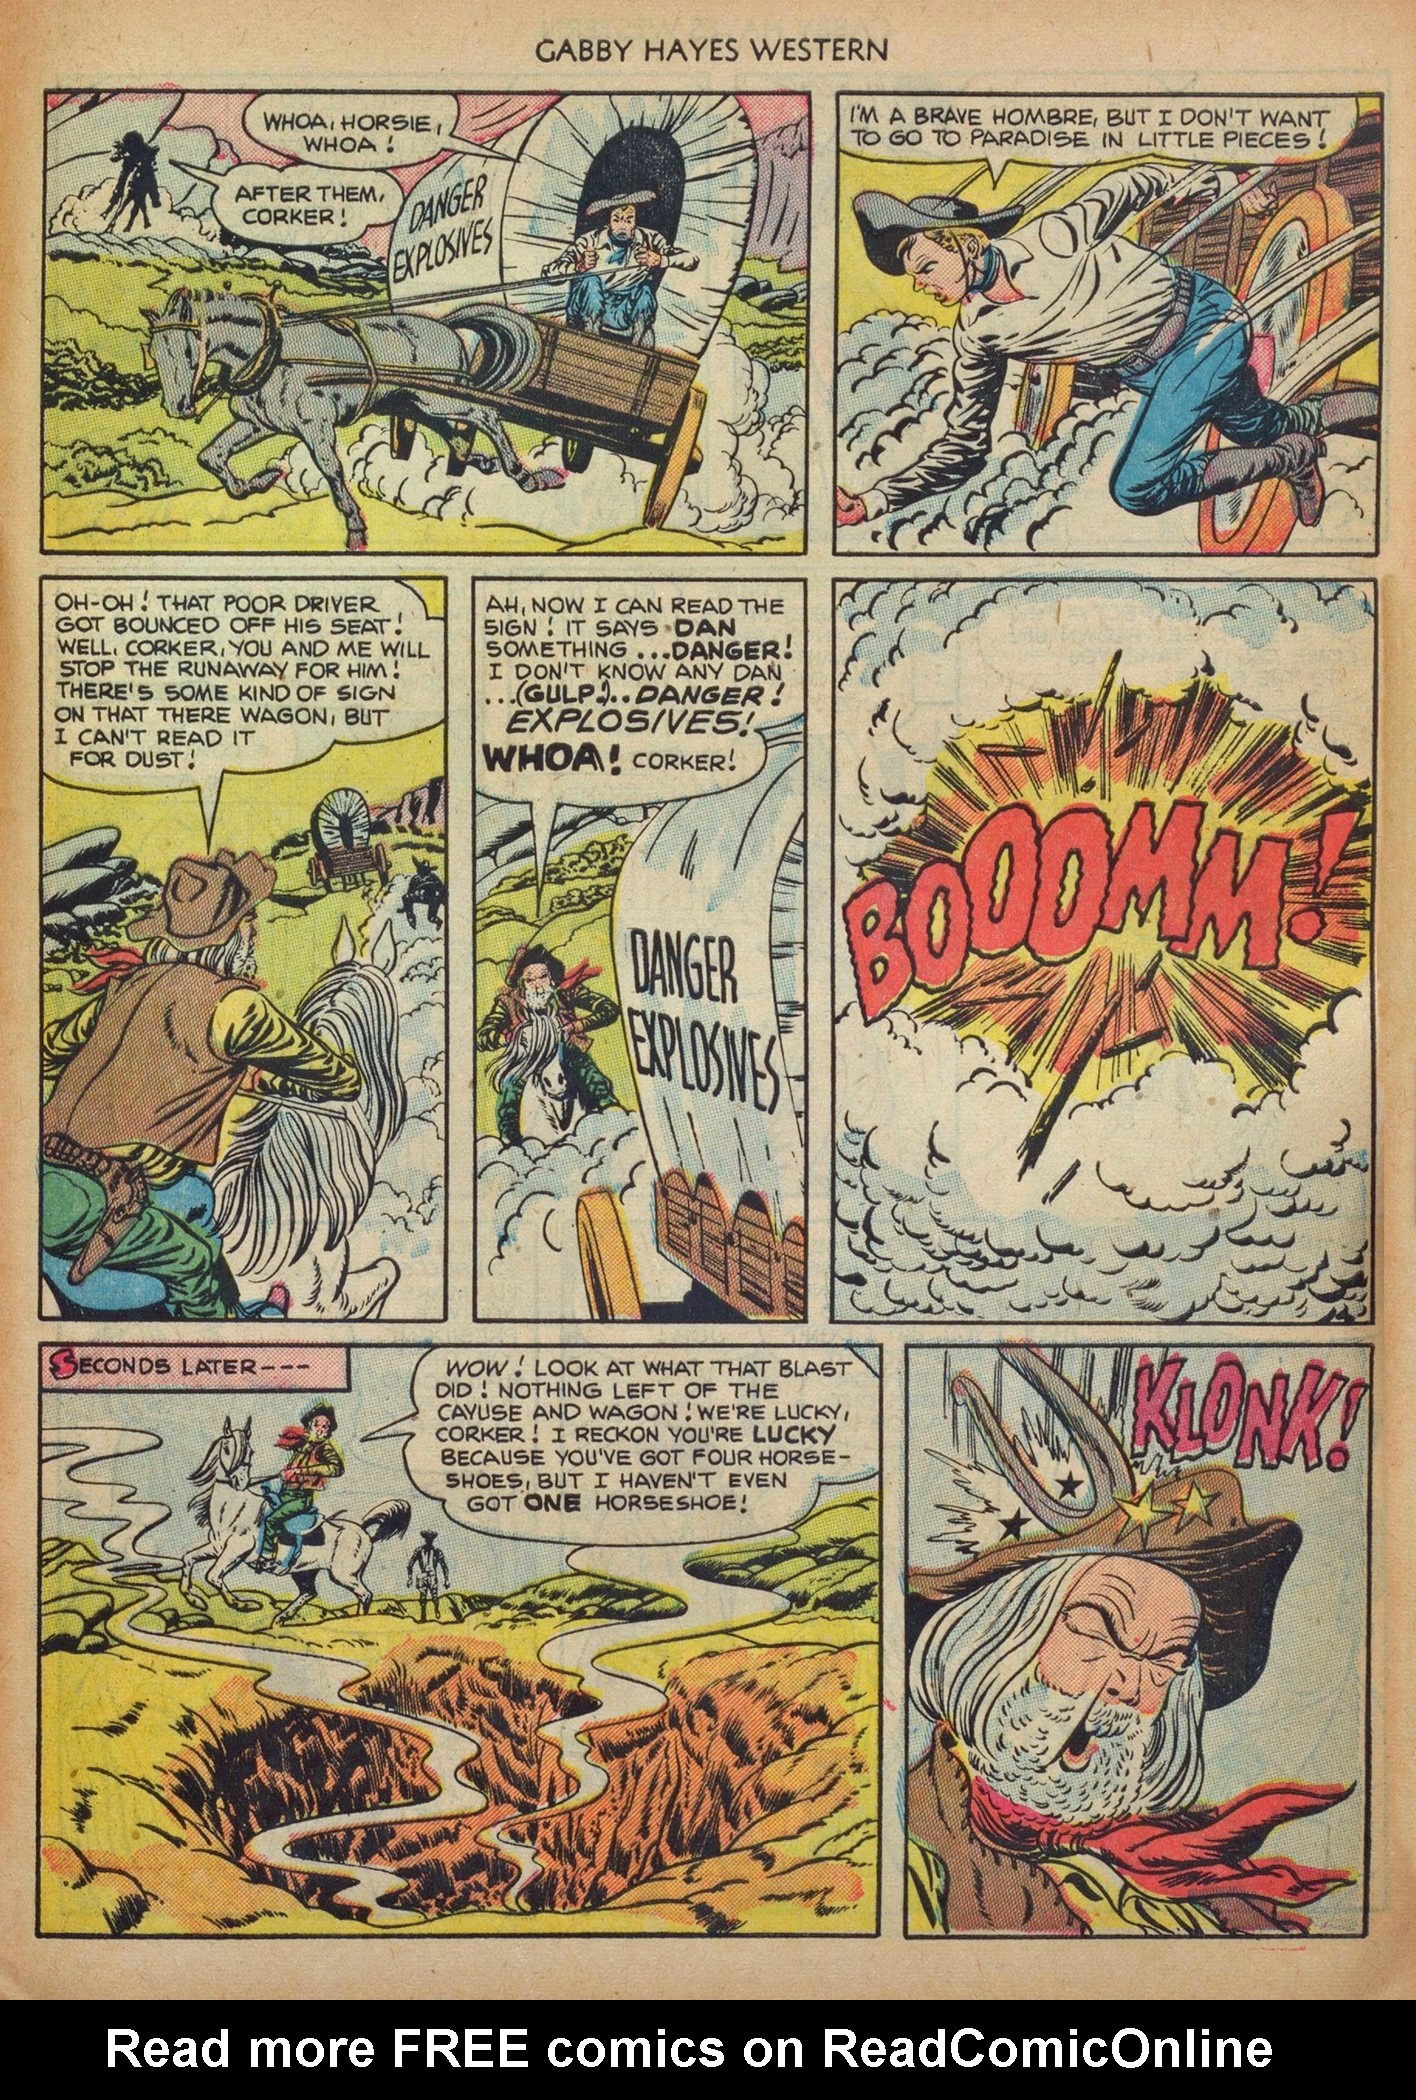 Read online Gabby Hayes Western comic -  Issue #44 - 29